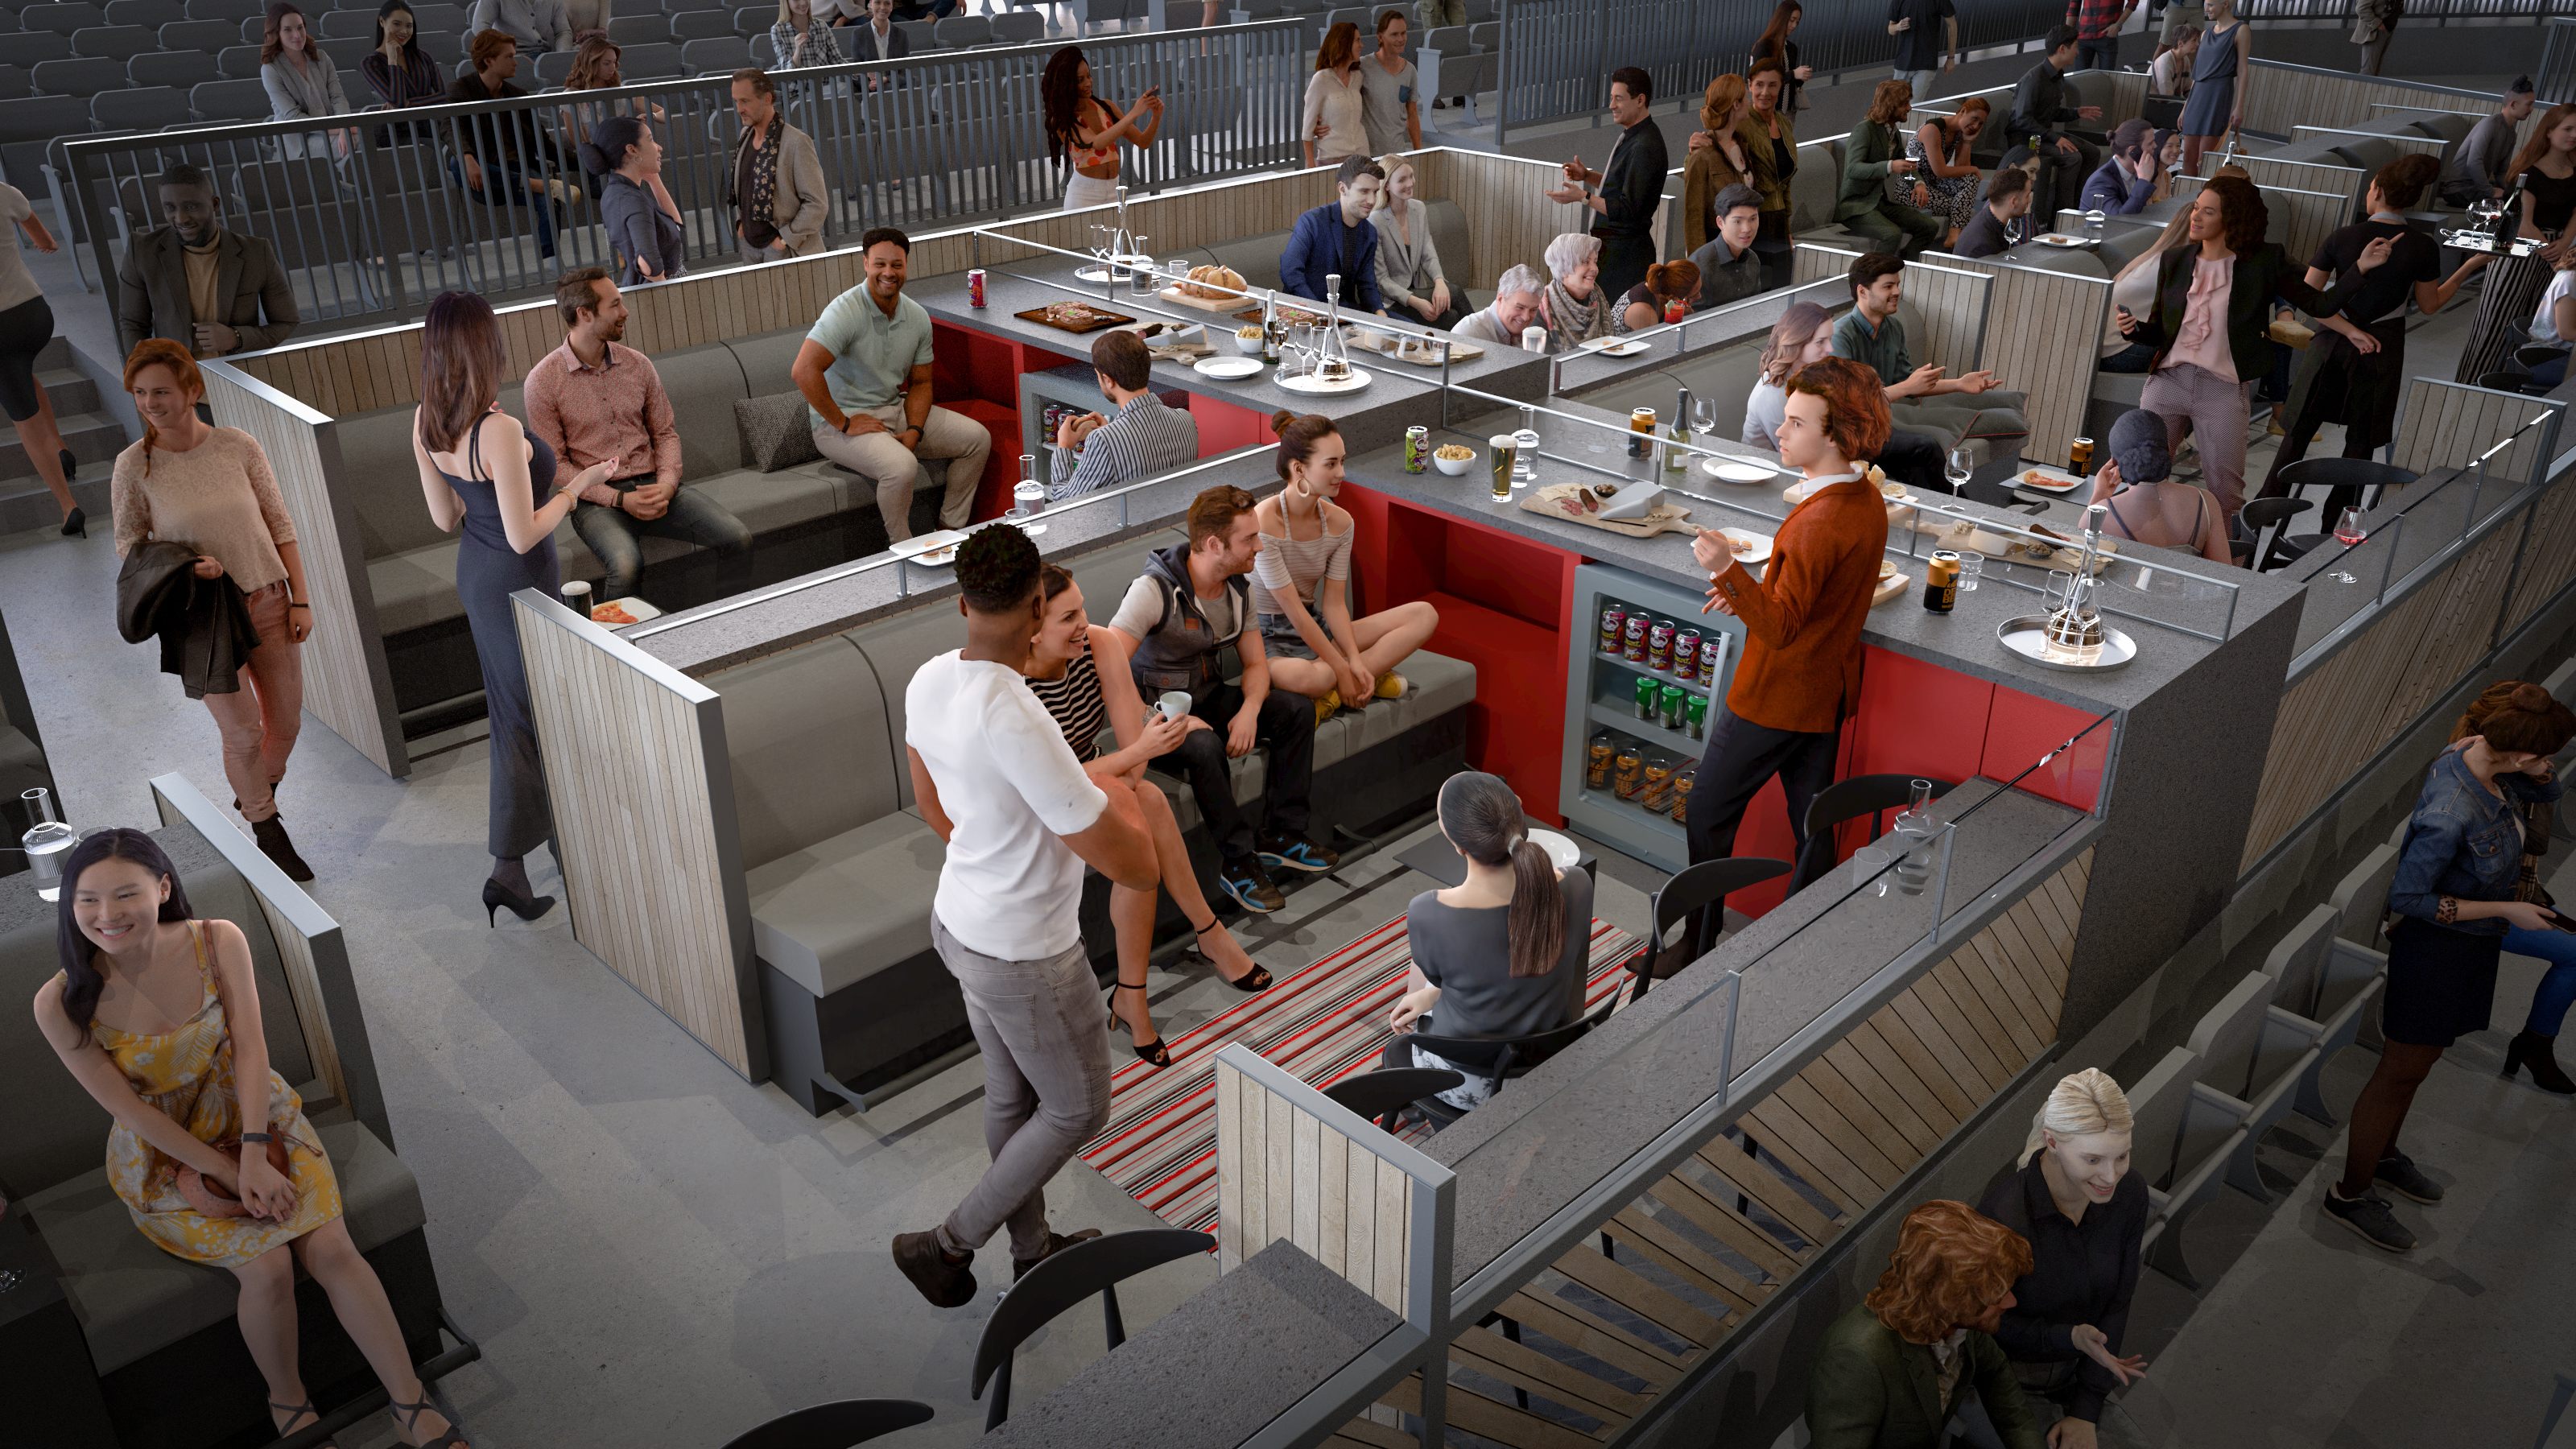 Have you noticed? Dos Equis Pavilion has new seating areas and premium services